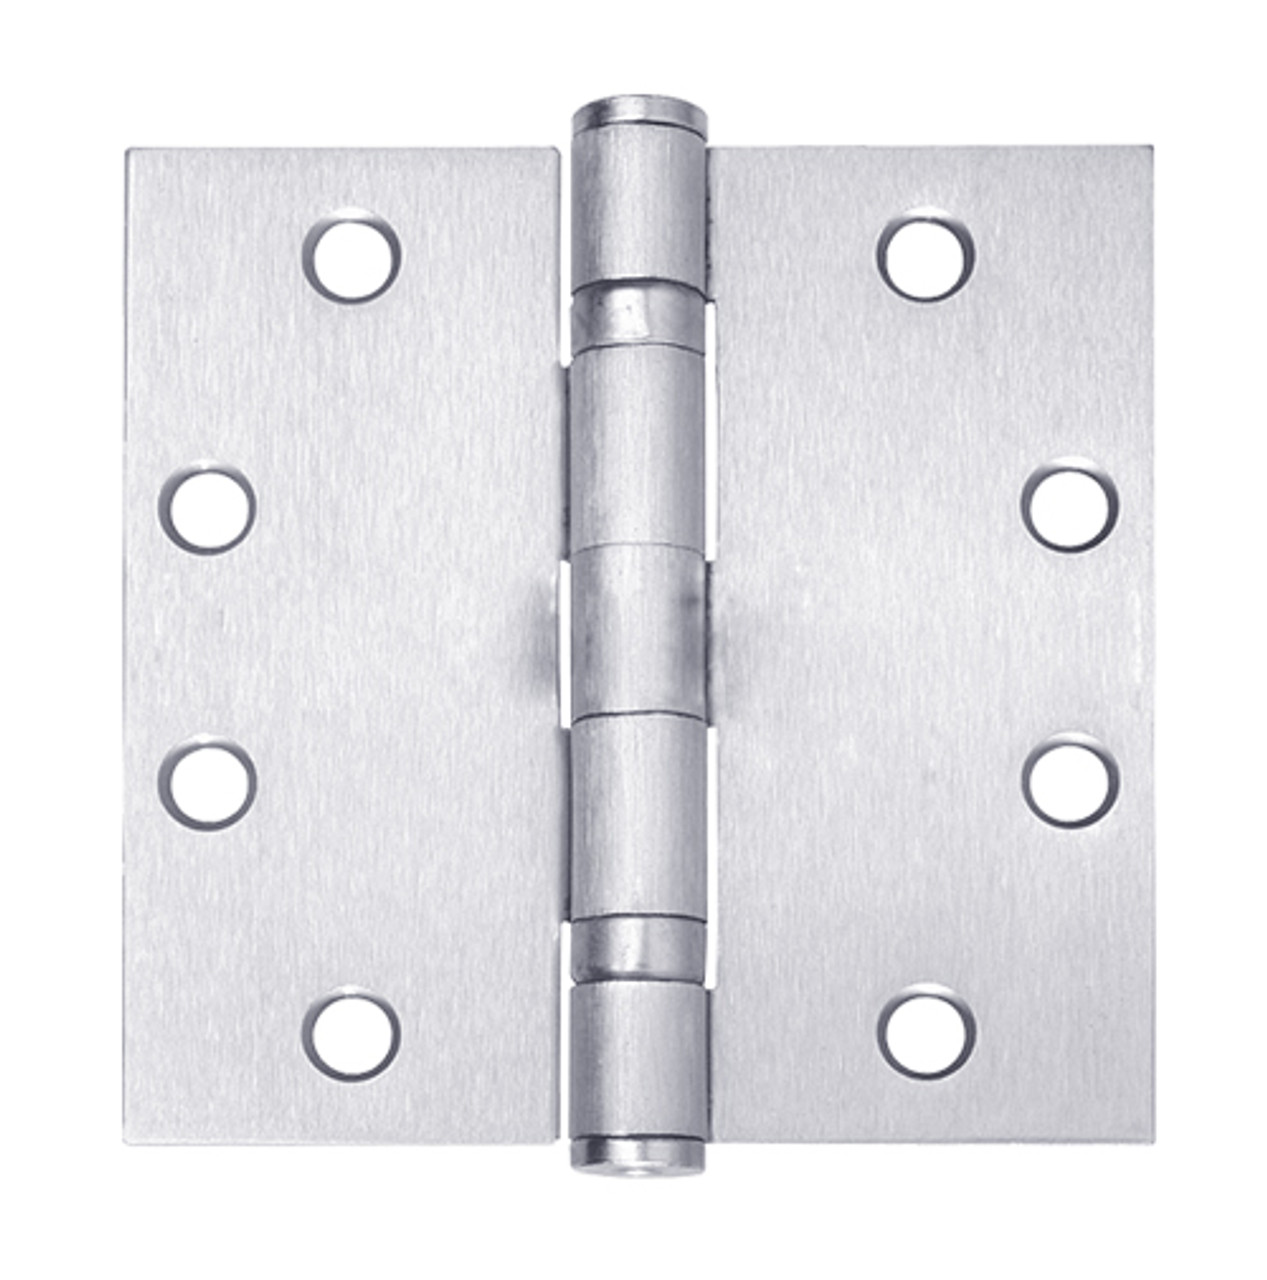 5BB1-4-5x4-5-625 IVES 5 Knuckle Ball Bearing Full Mortise Hinge in Bright Chrome